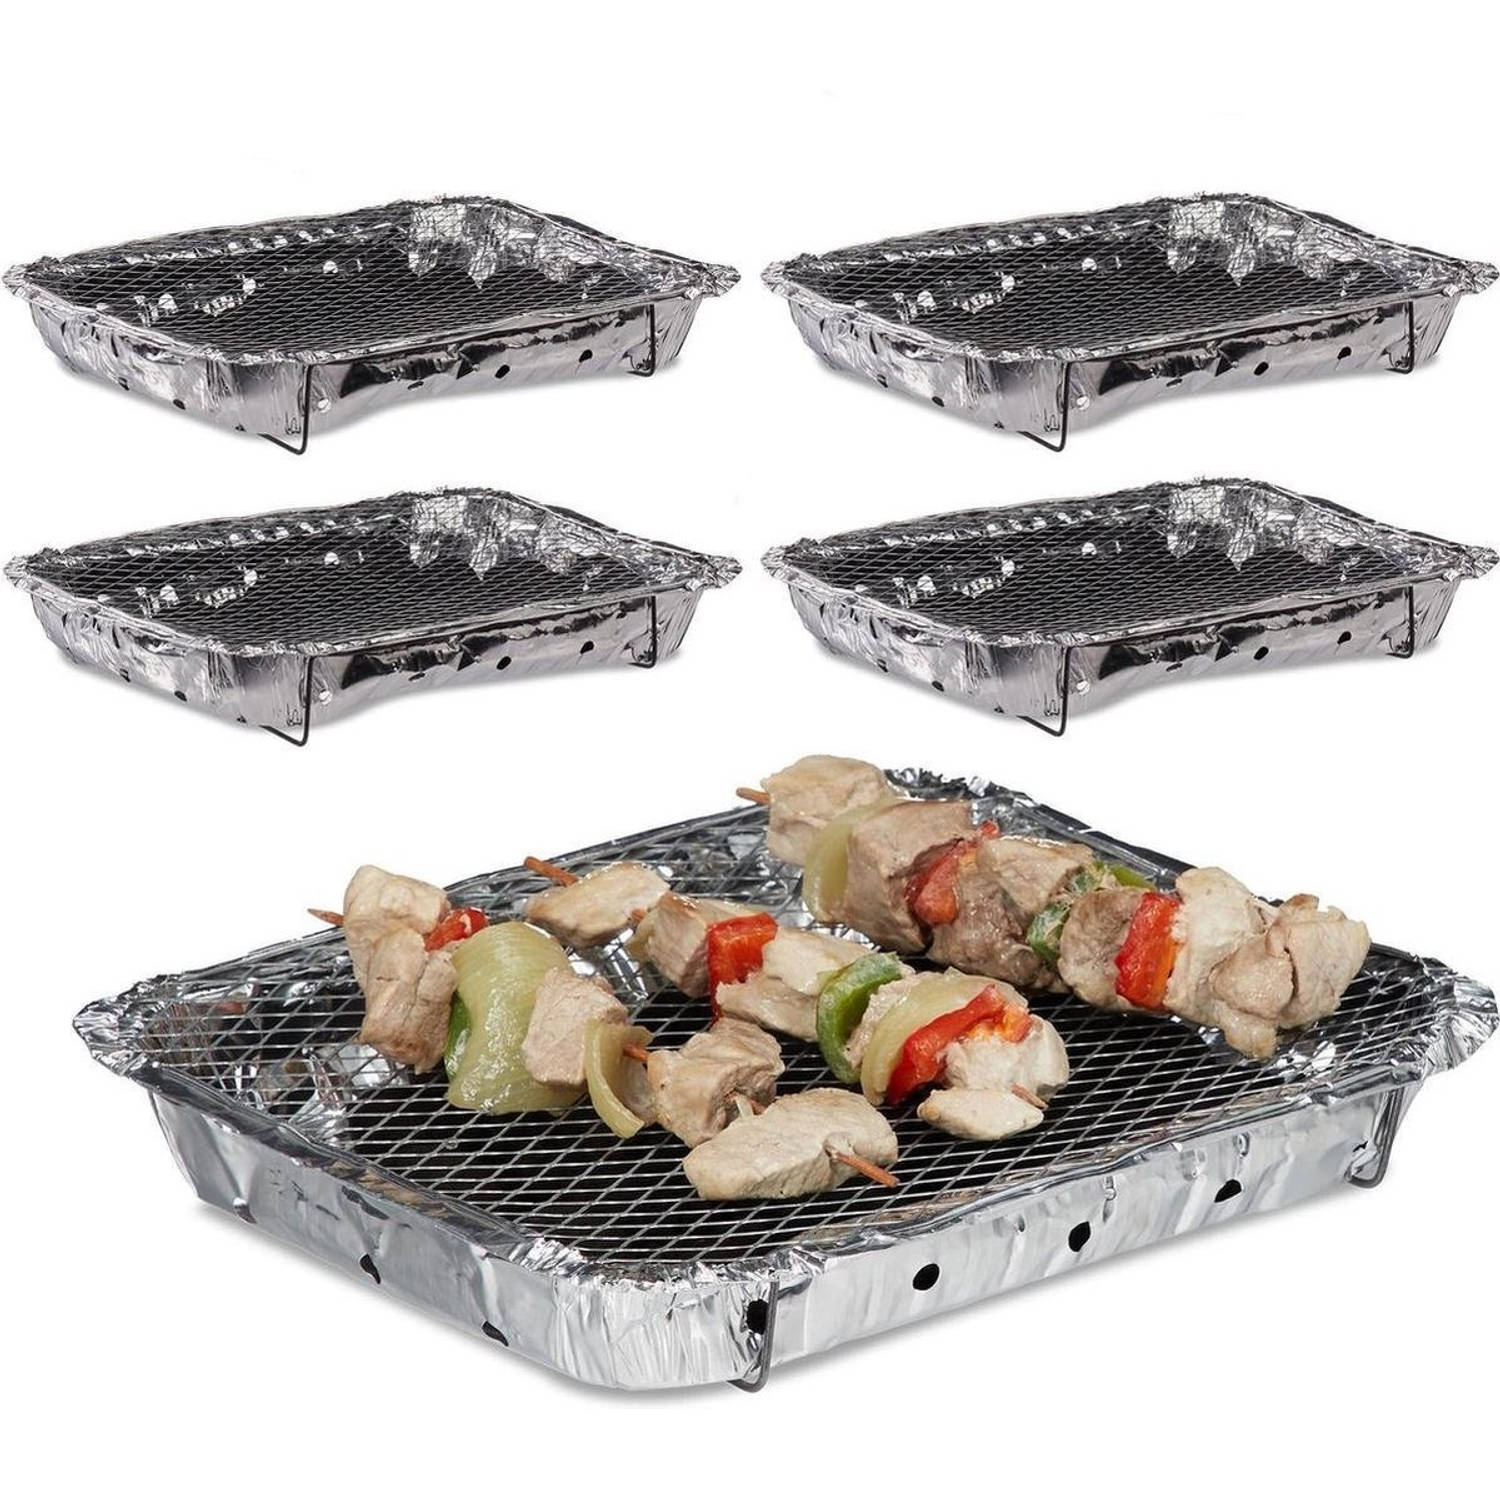 5 Stuks Barbecue Instant Wegwerp Buiten barbecue Tafel Rooster Picknick Barbecue accessoires Grill